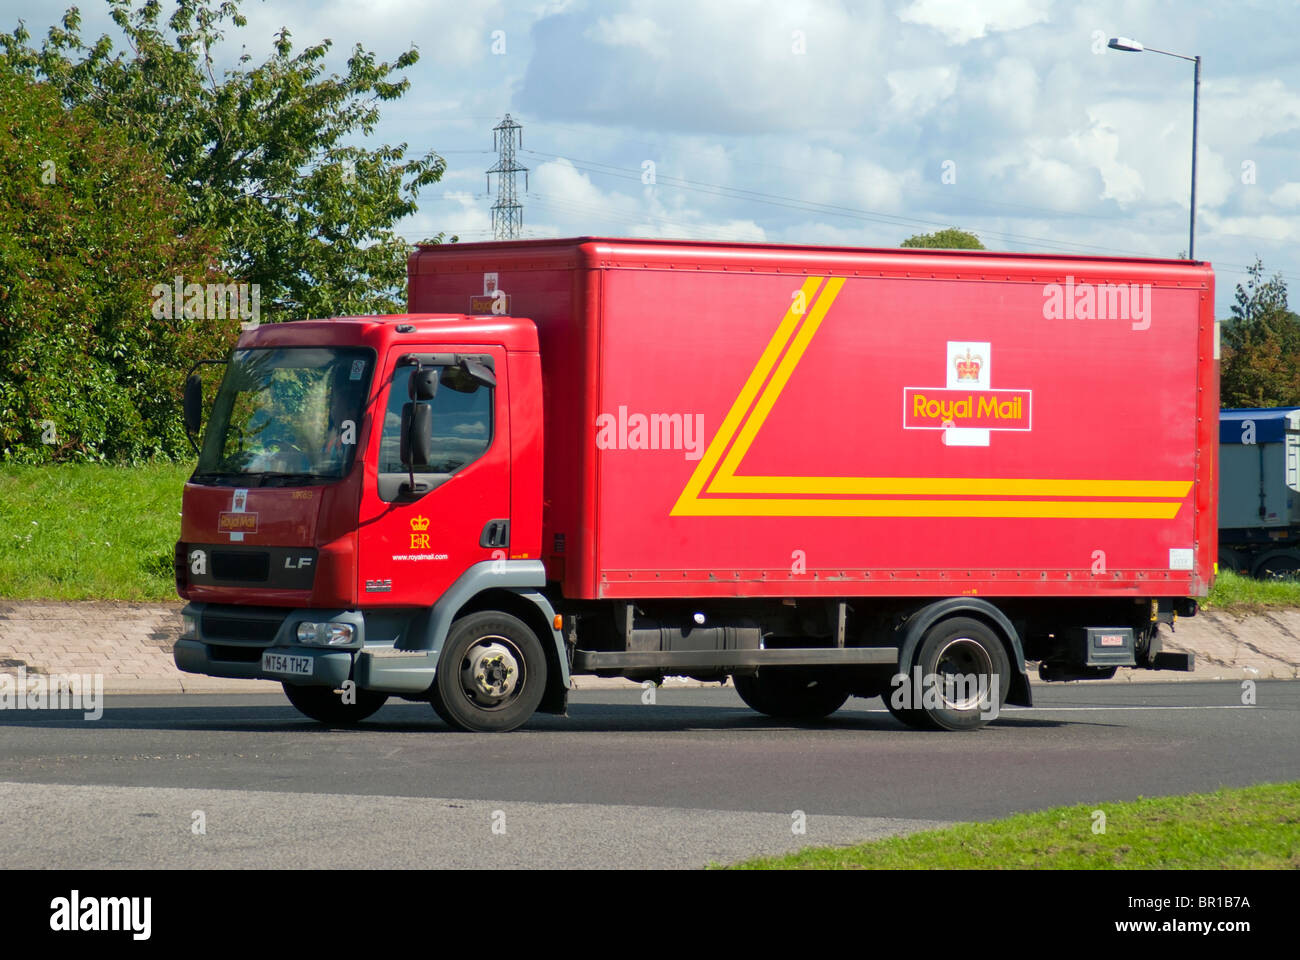 Royal Mail Lorry Stock Photo